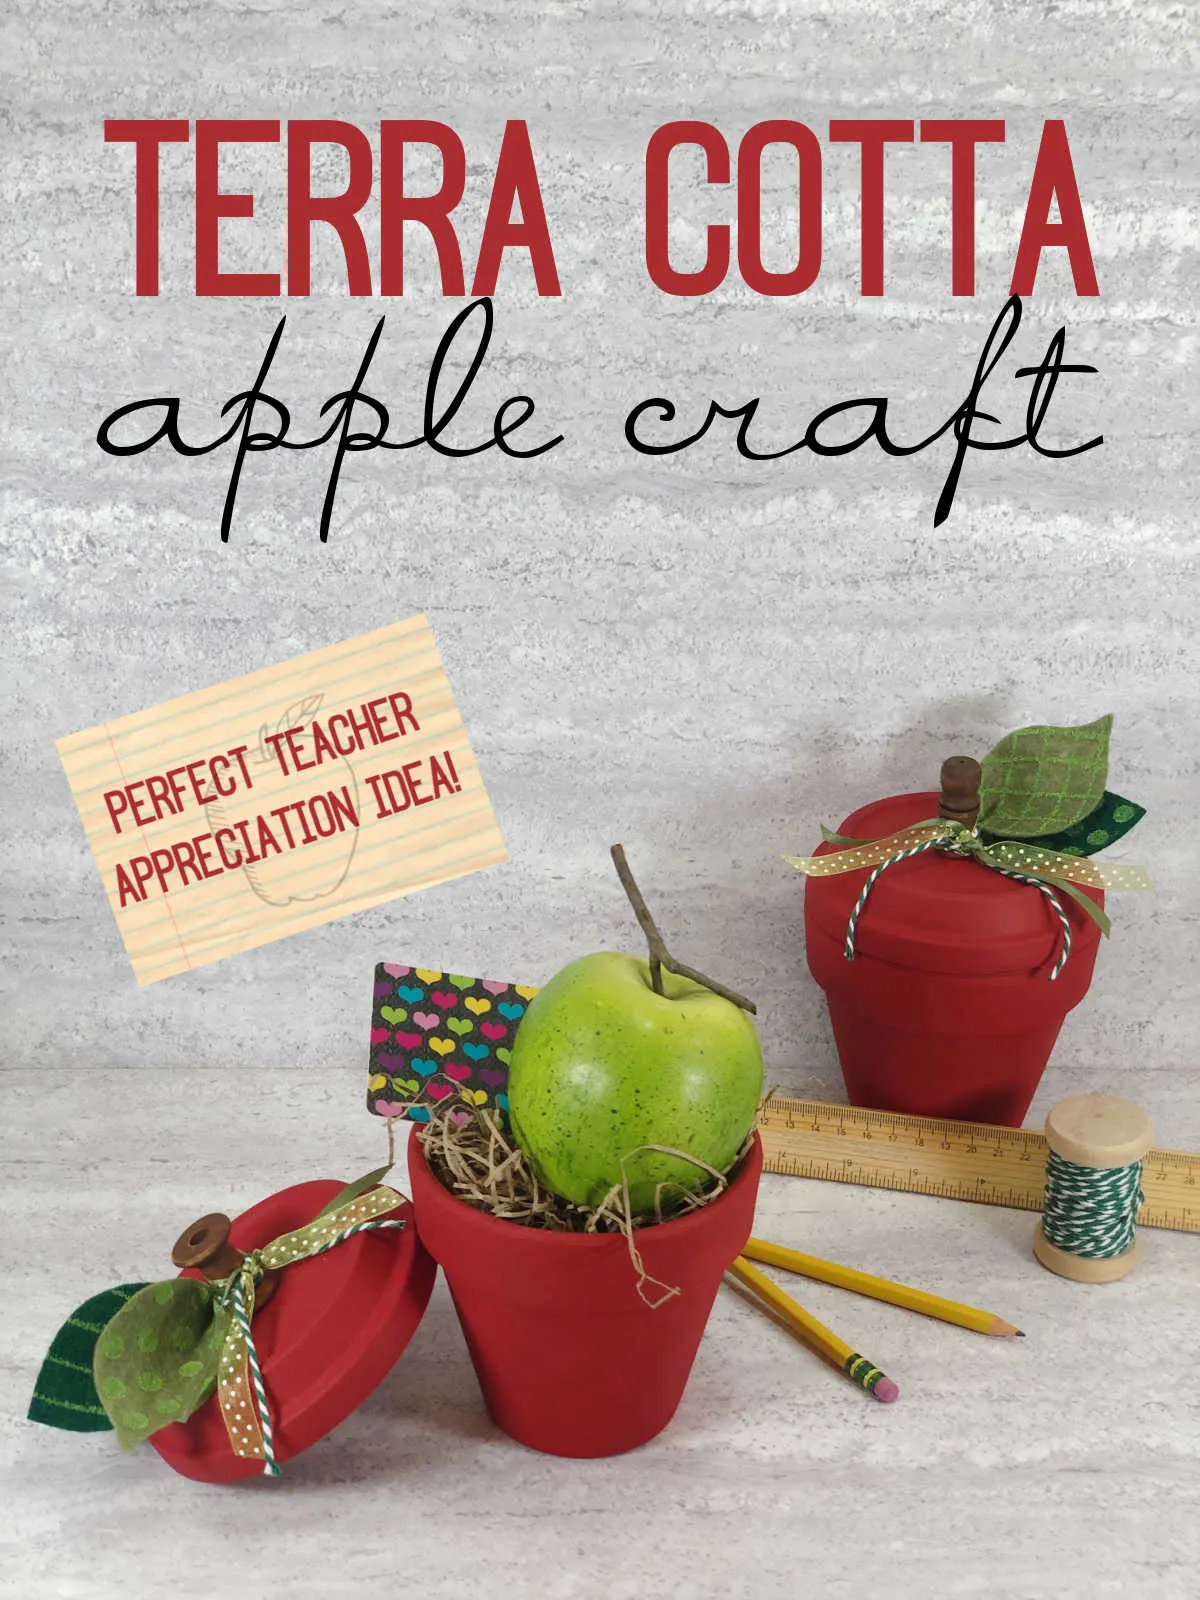 Completed Terra Cotta Pot Apple Craft filled with an actual green apple and gift card.